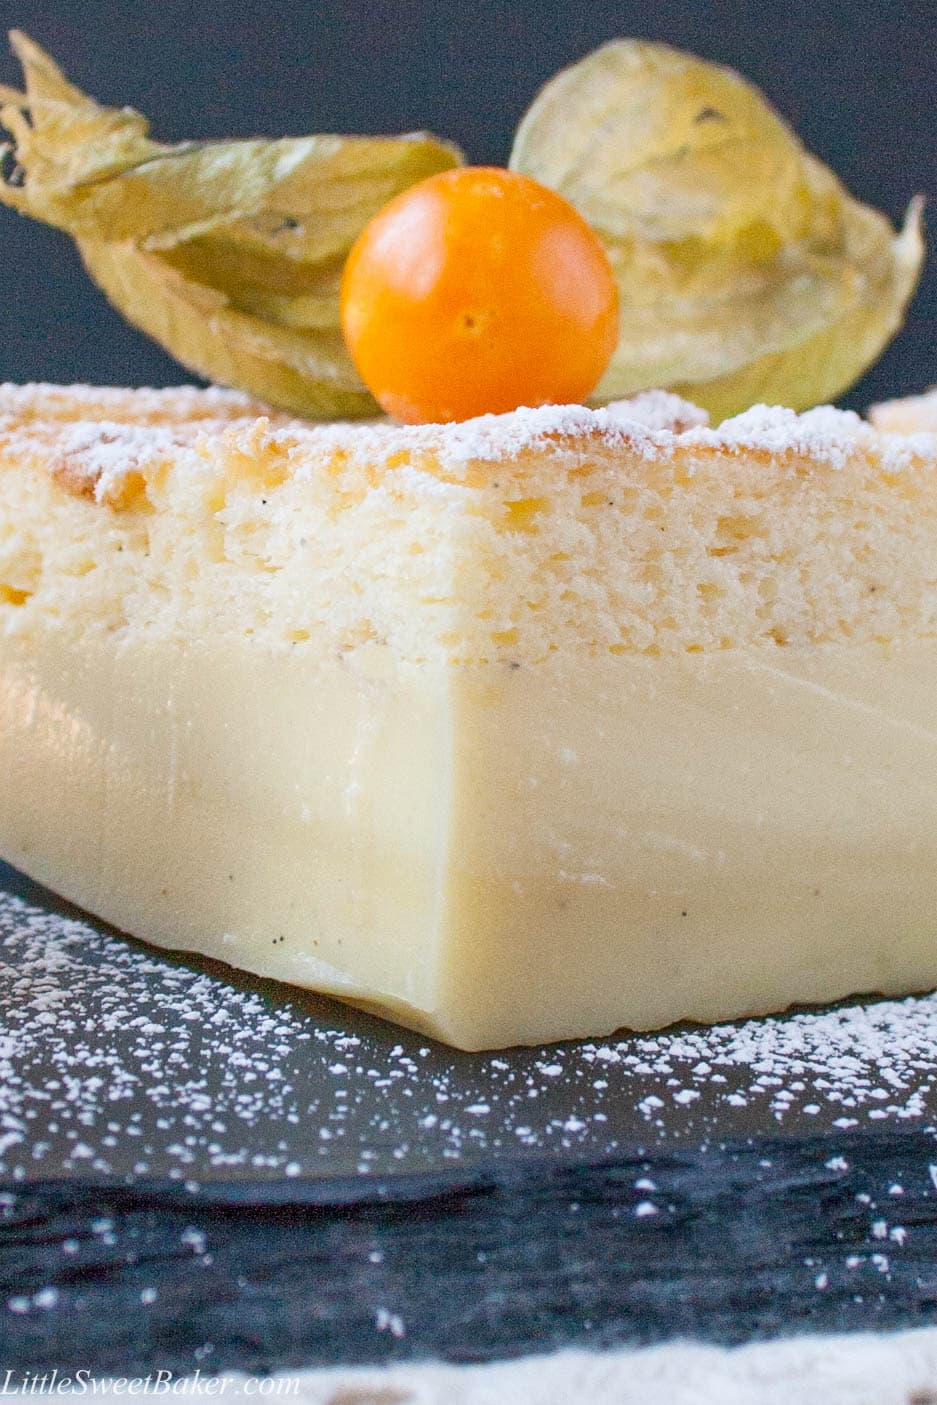 VANILLA BEAN MAGIC CAKE. One simple batter that bakes into 3 different delicious layers, a chewy dense base, a creamy custard centre and a fluffy sponge cake on top. It's truly magic!